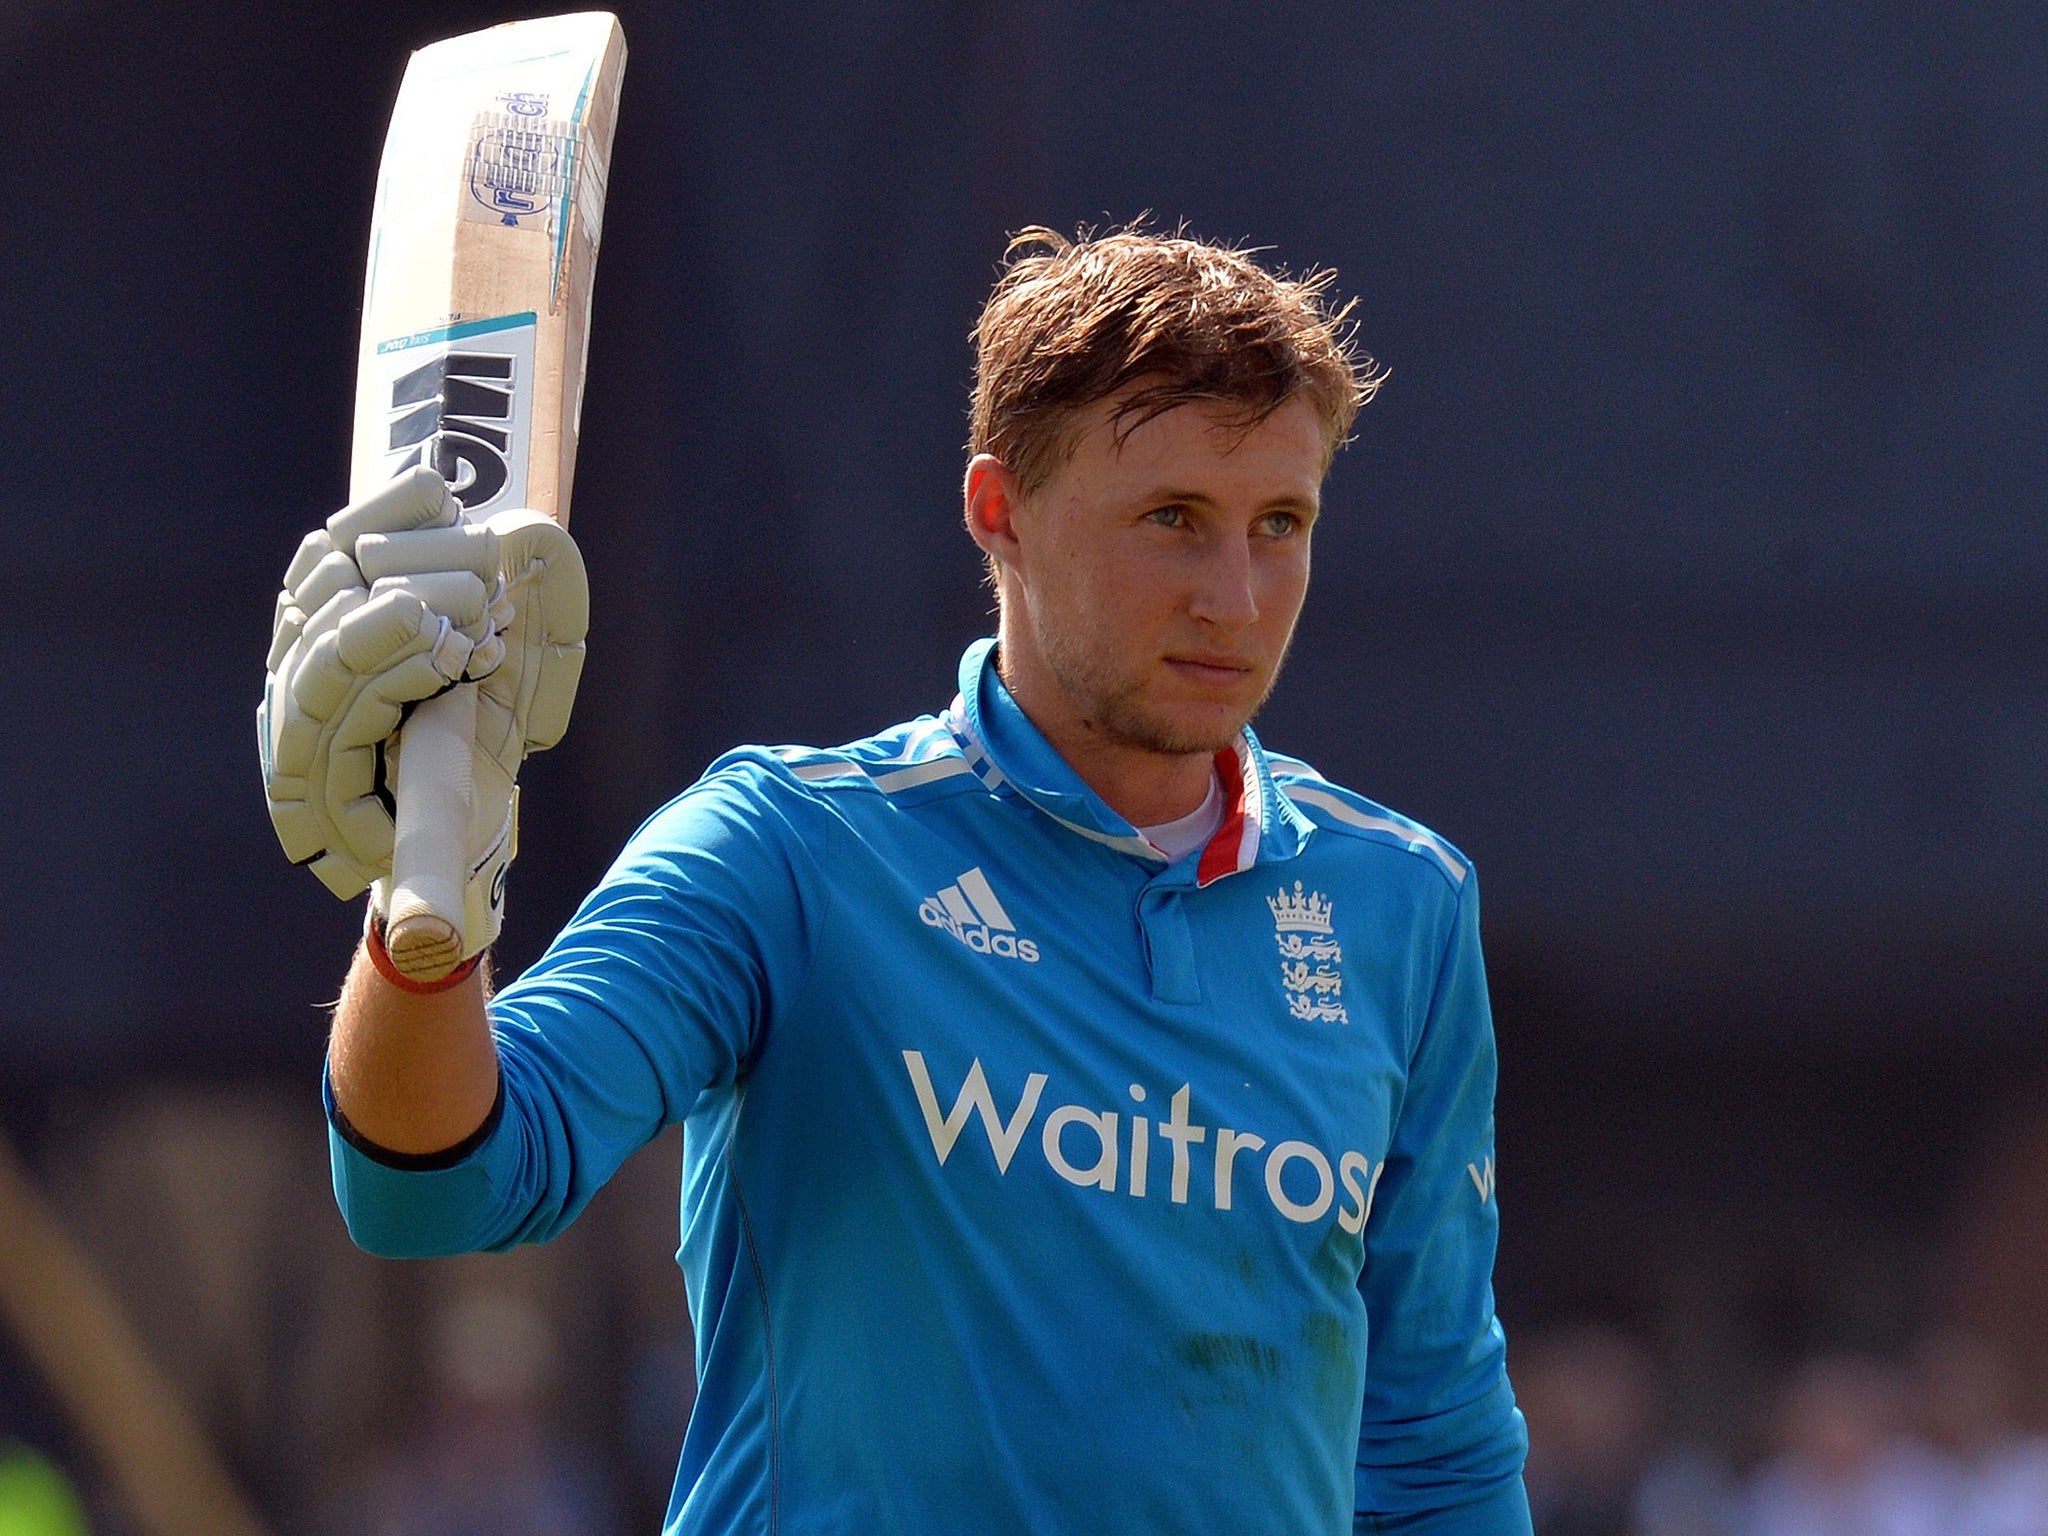 Joe Root is likely to be played at No 4 in the one-day side